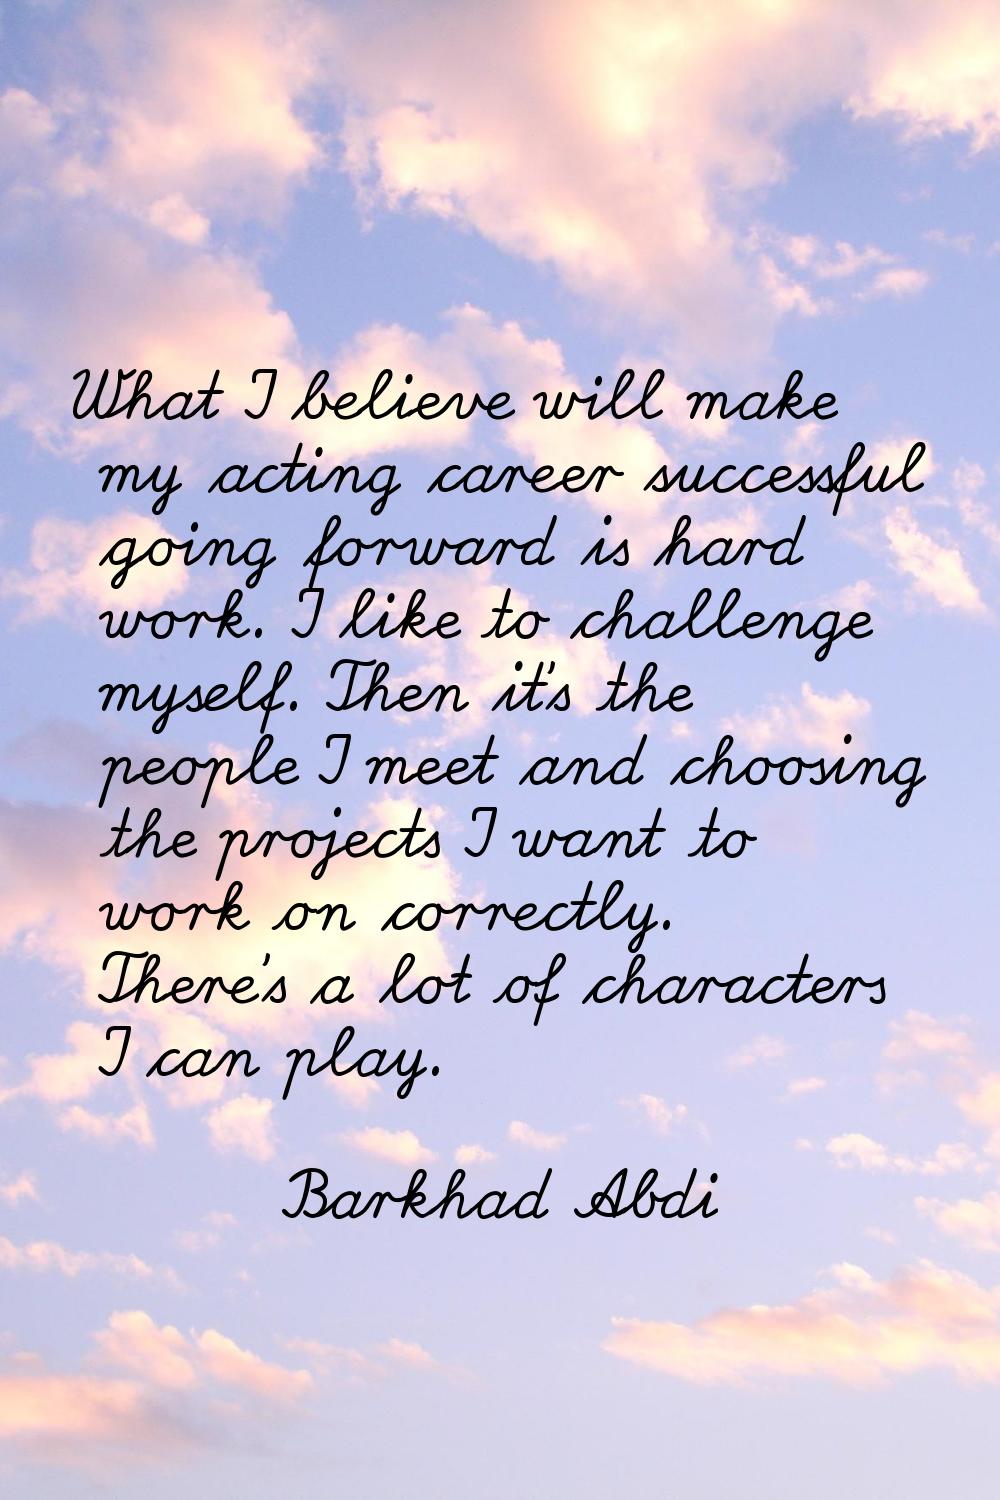 What I believe will make my acting career successful going forward is hard work. I like to challeng